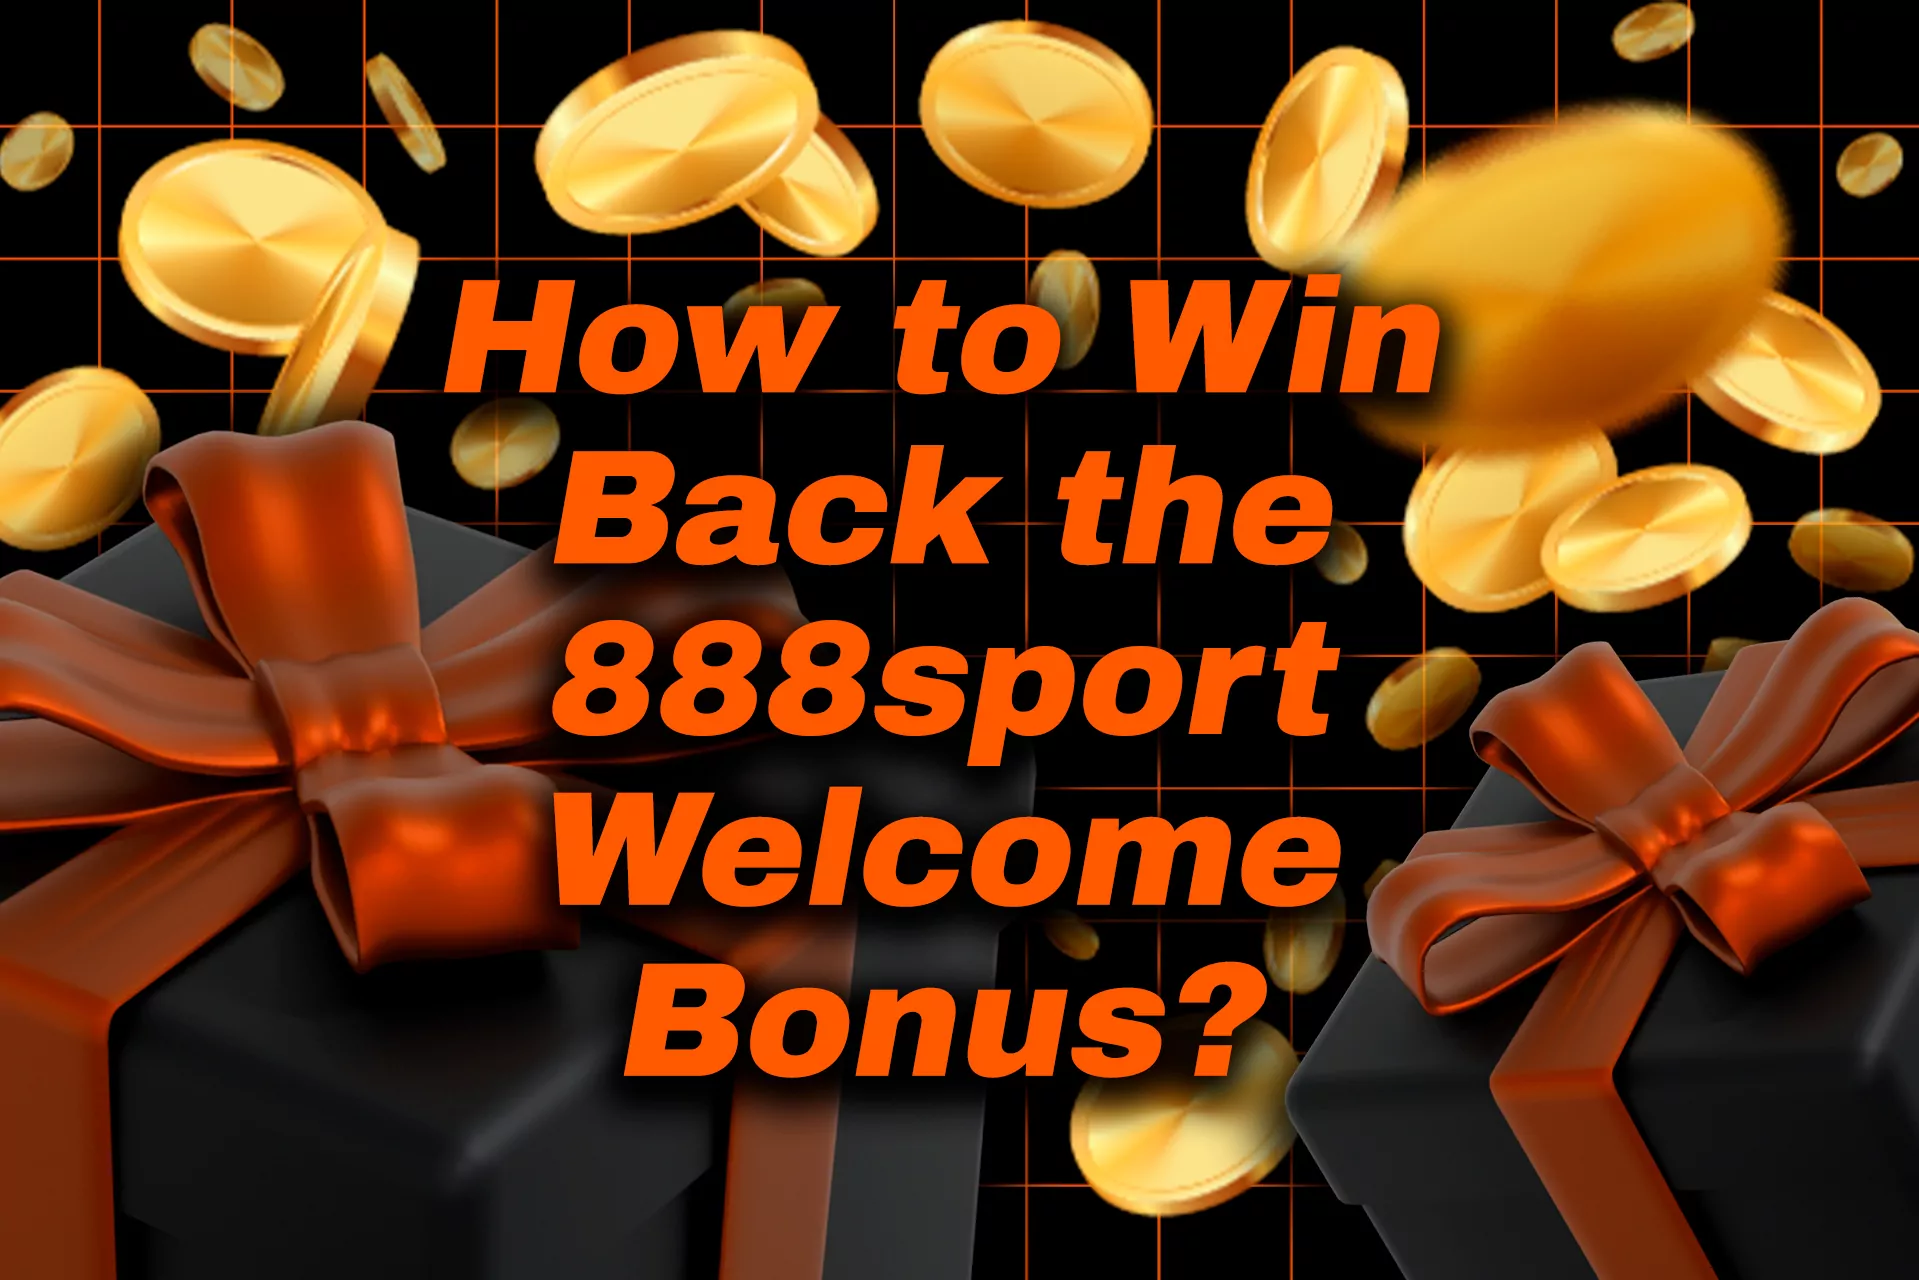 Meet the conditions to win back the bonus.